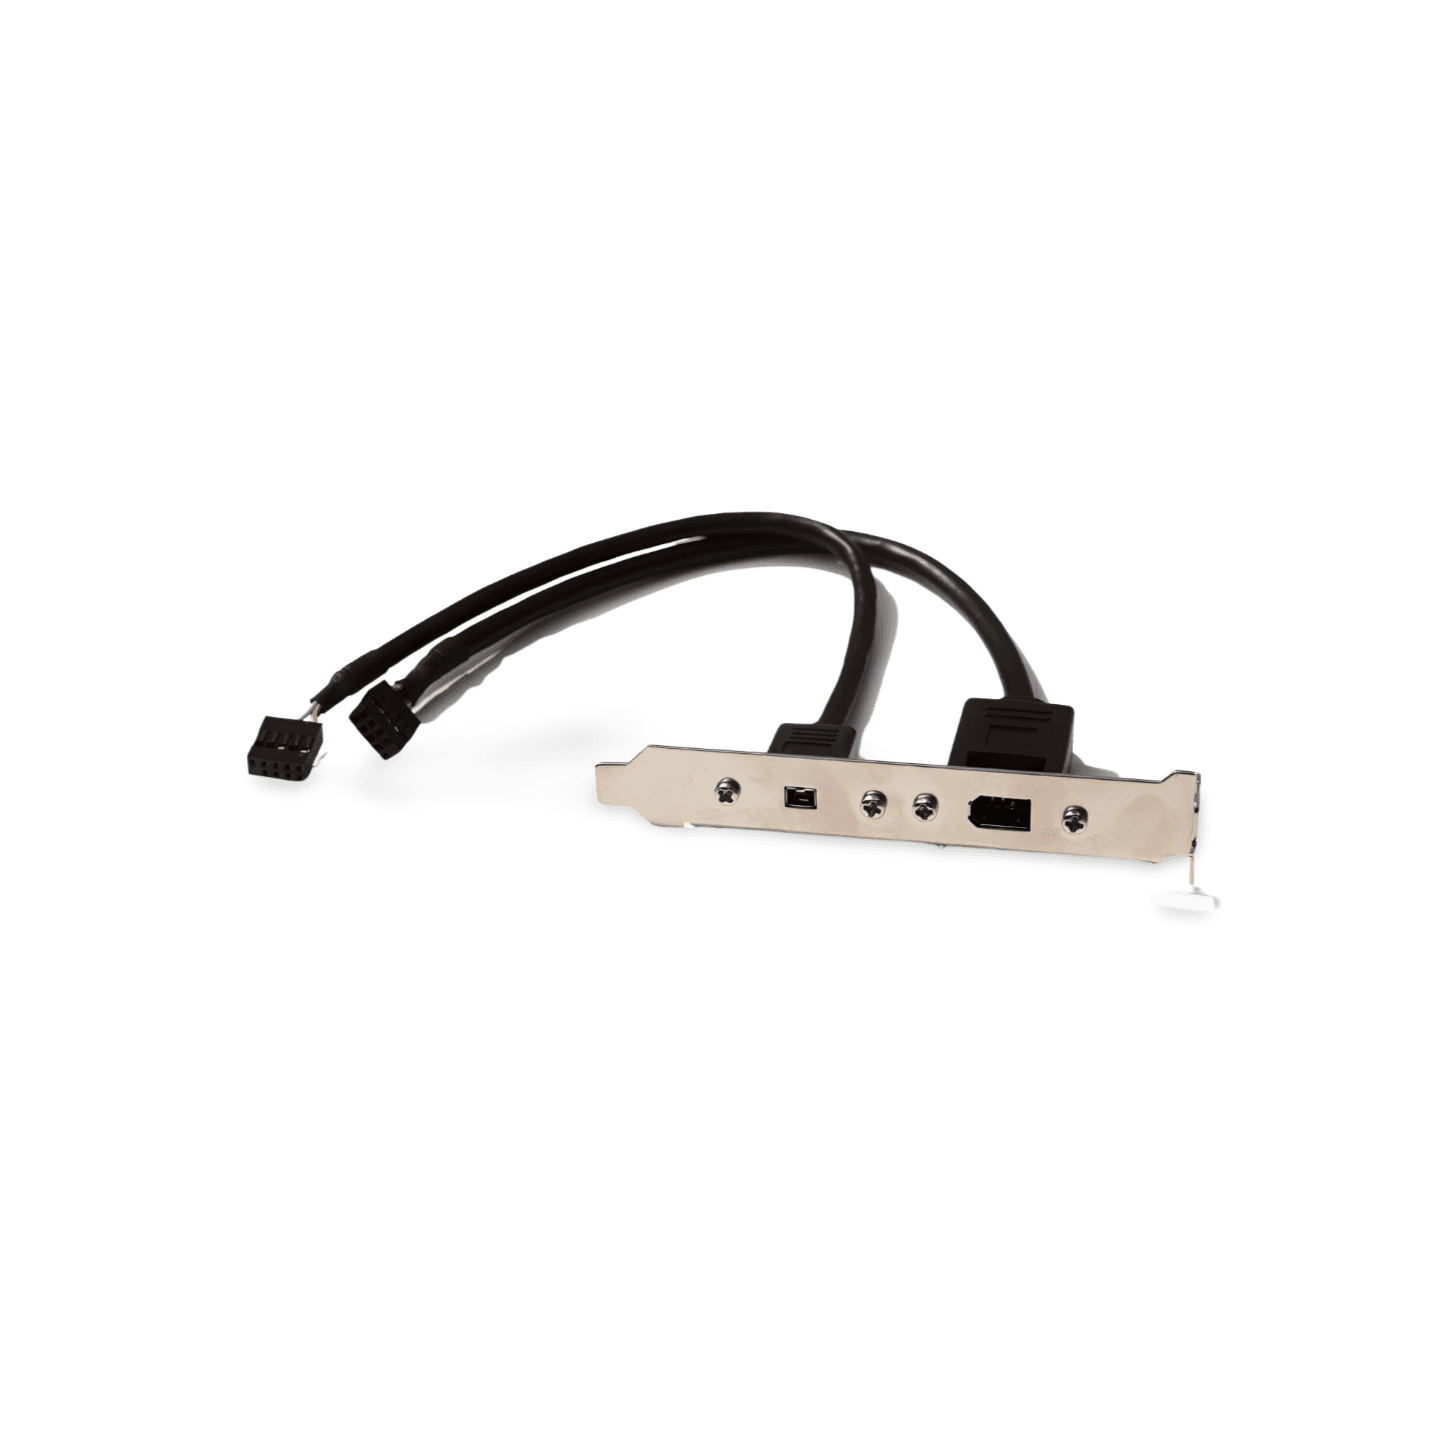 1ft FireWire IEEE 1394a Expansion Bracket 4 Pin to 6 Pin Dual FireWire Headers black